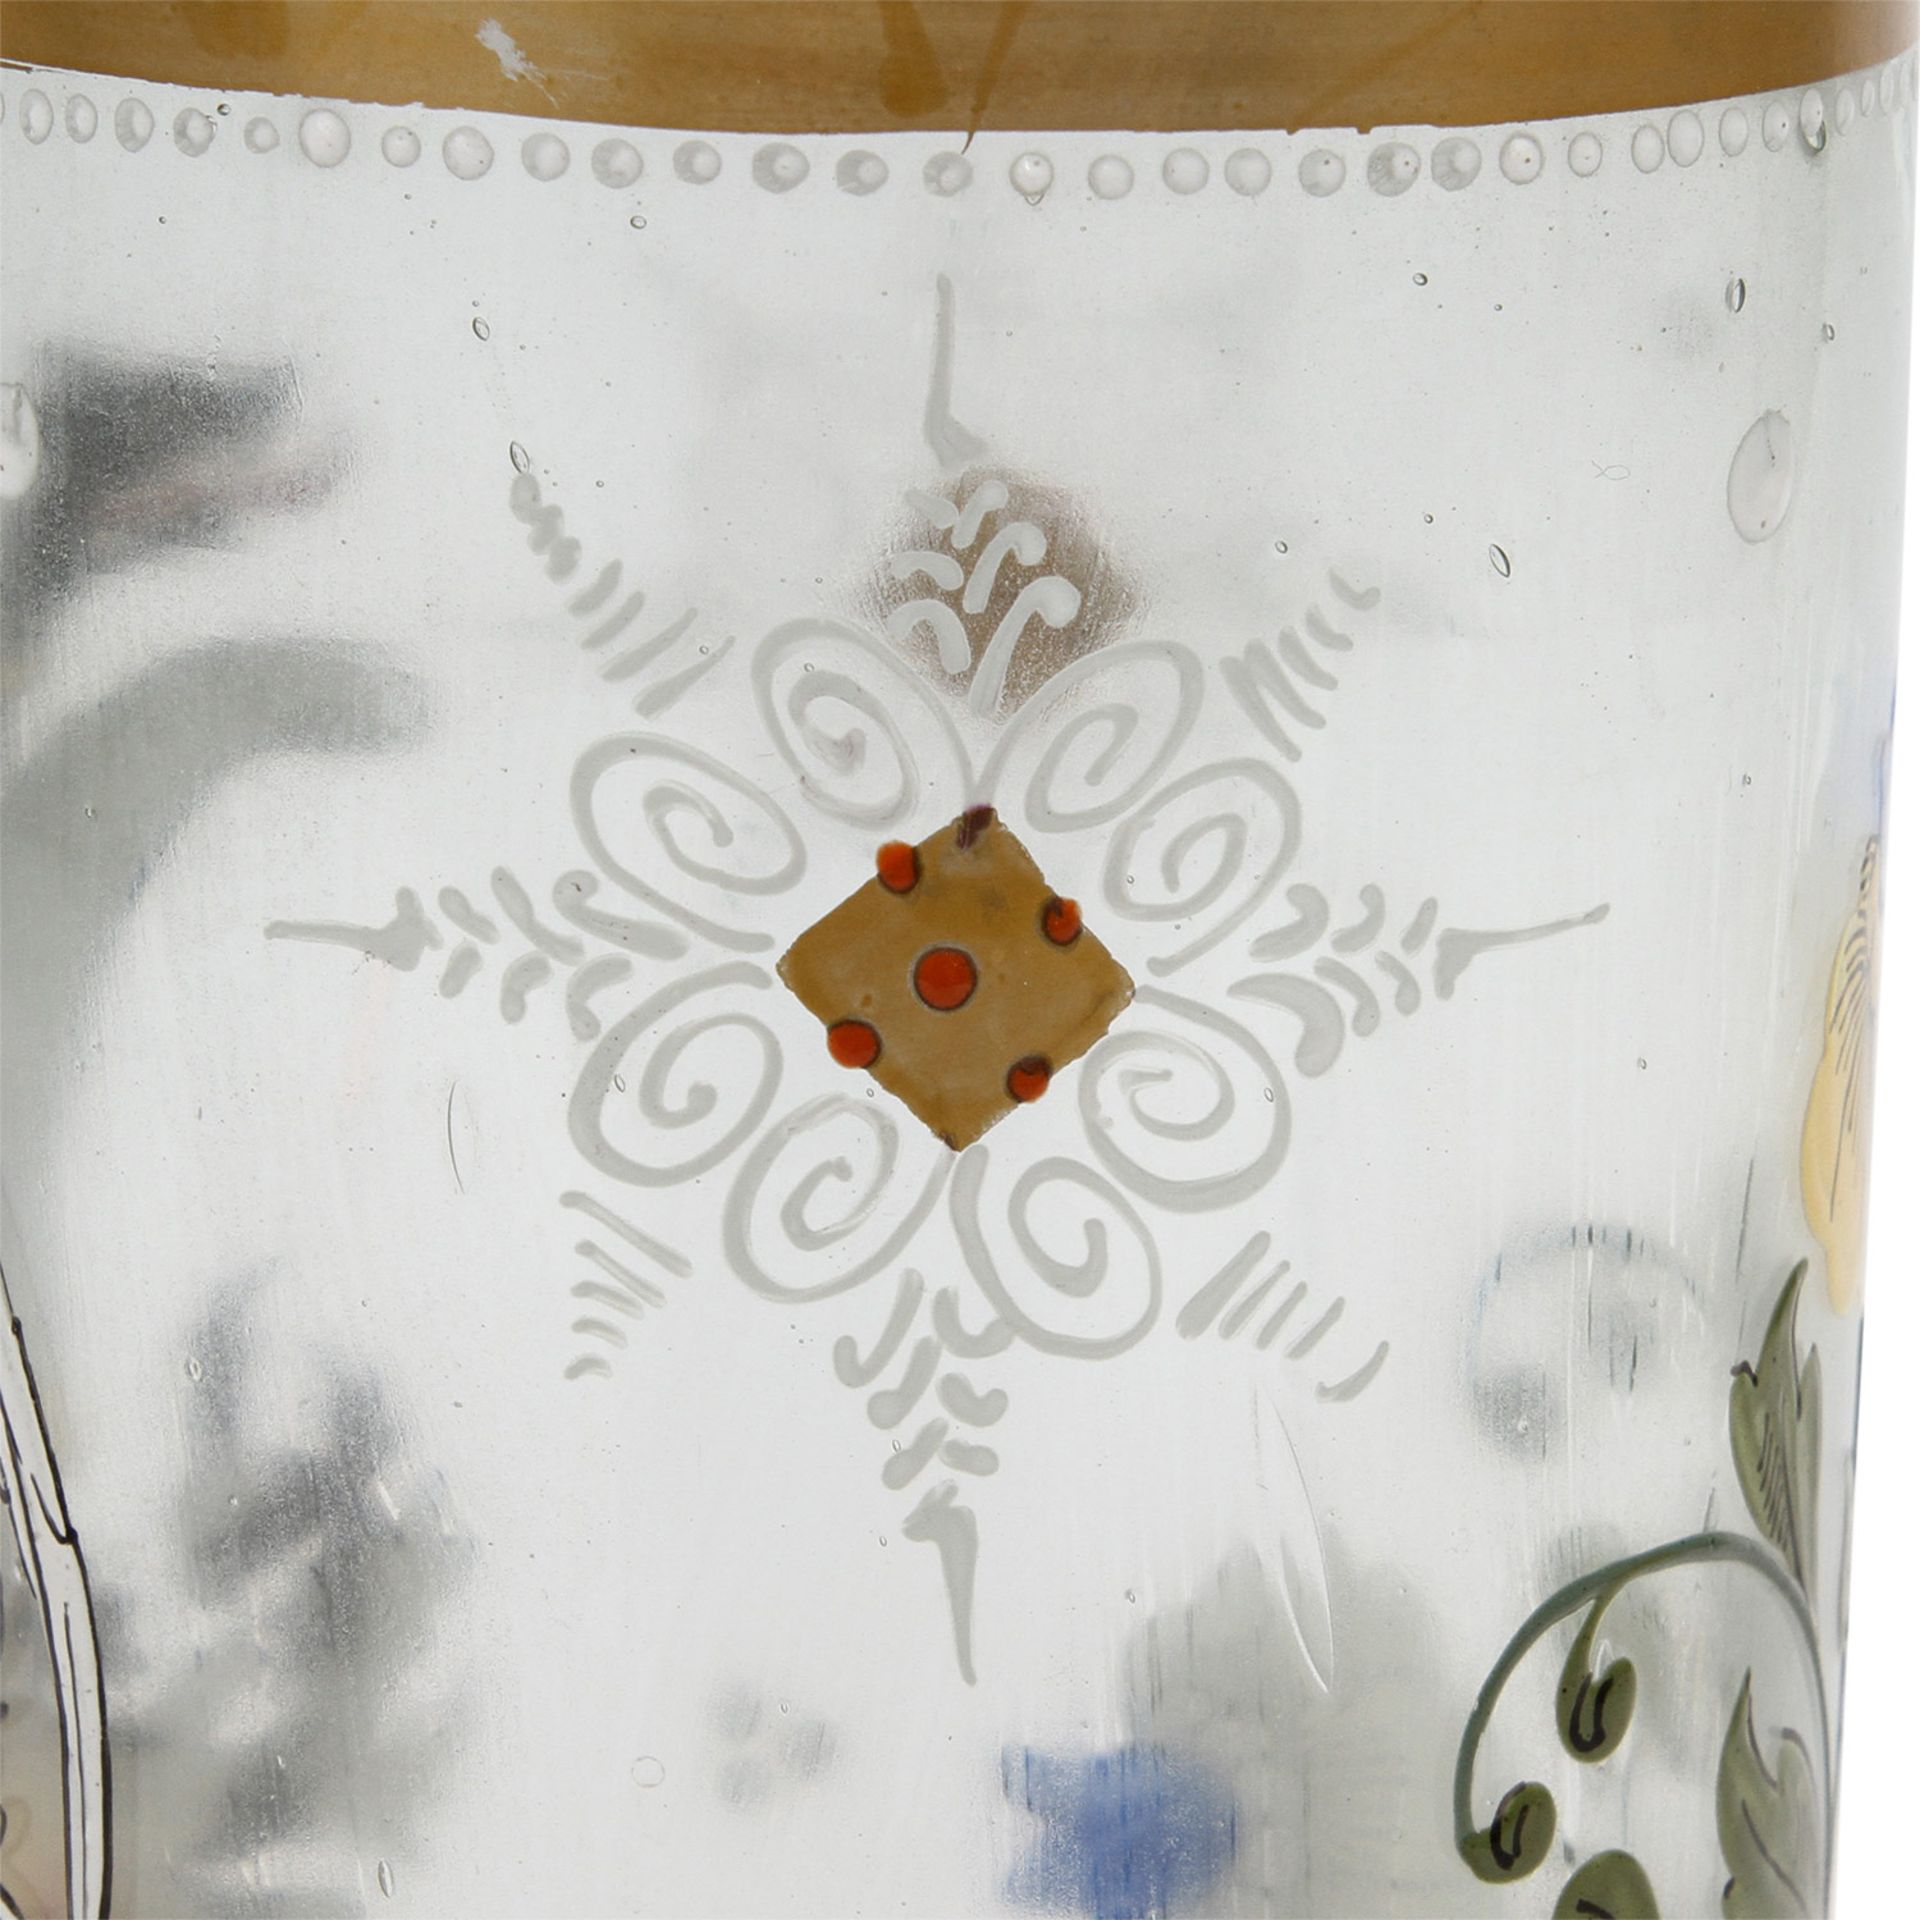 WAPPEN-BECHER Ende 19.Jh.,farbloses Glas mit farbiger Emailbemalung, gold staffiert, H: 22,5 cm. - Image 6 of 7